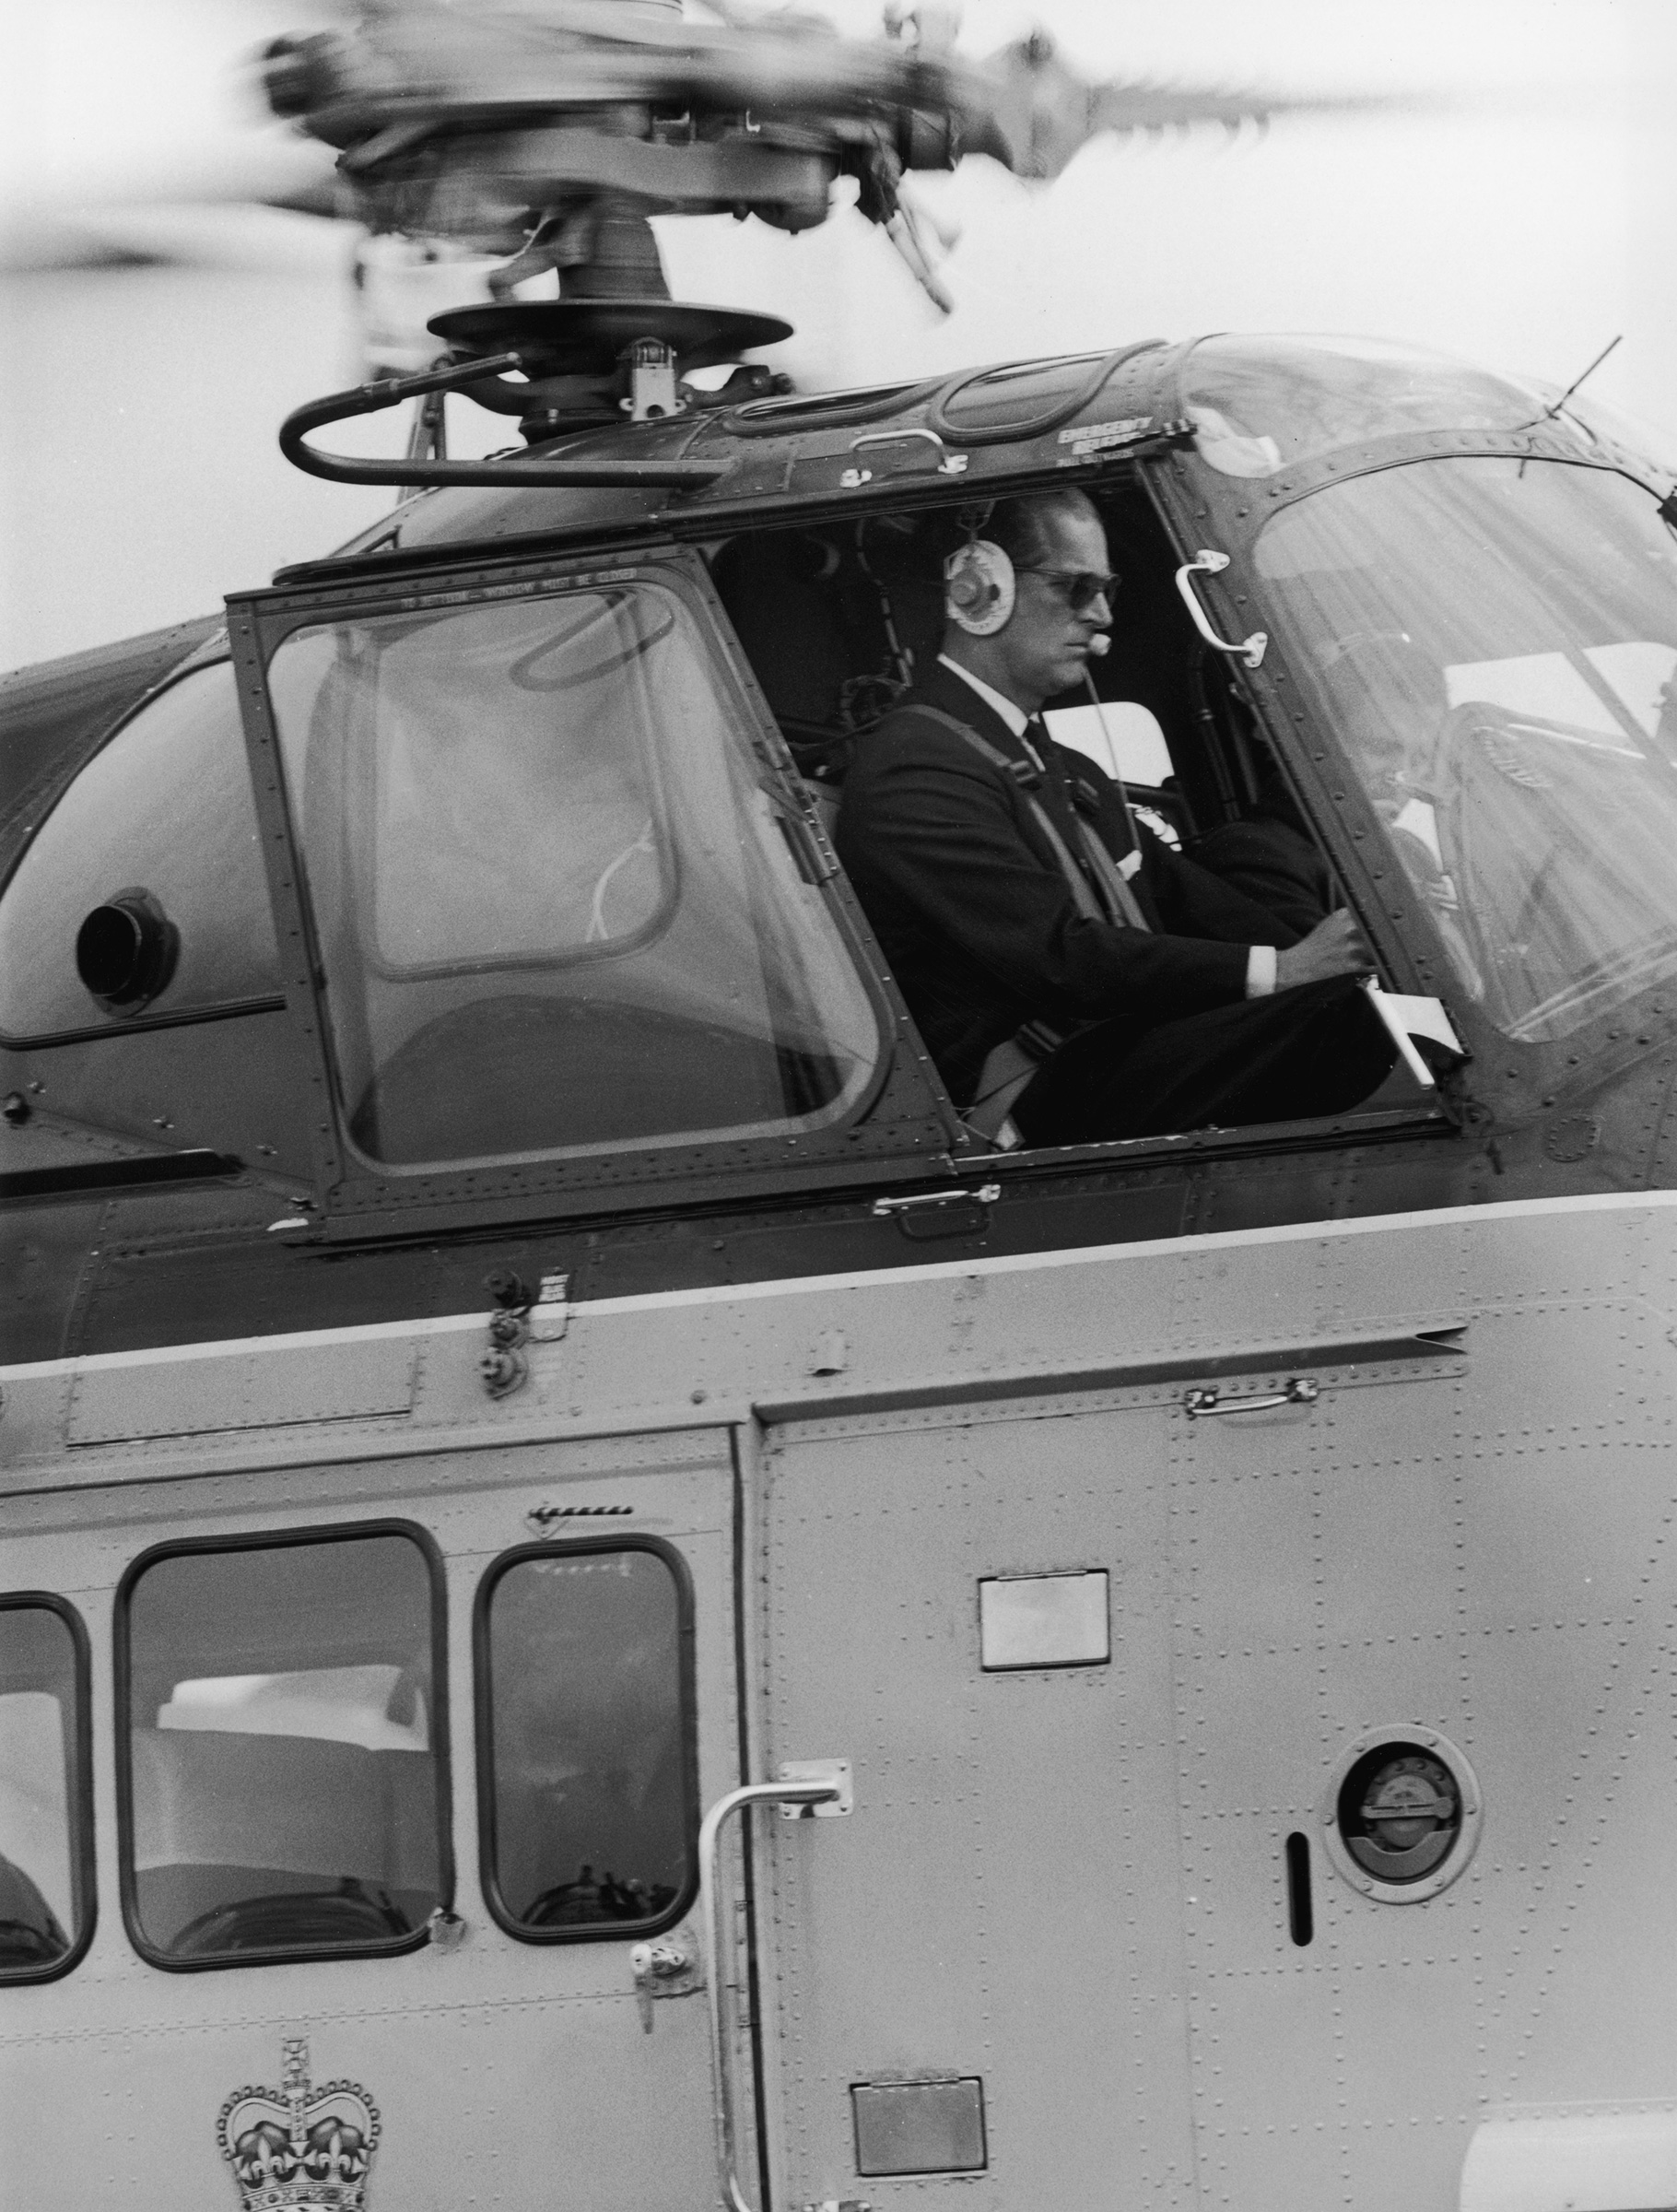 Prince Philip at the controls of the royal helicopter, July 28, 1965. (George W. Hales—Fox Photos/Hulton Archive/Getty Images)